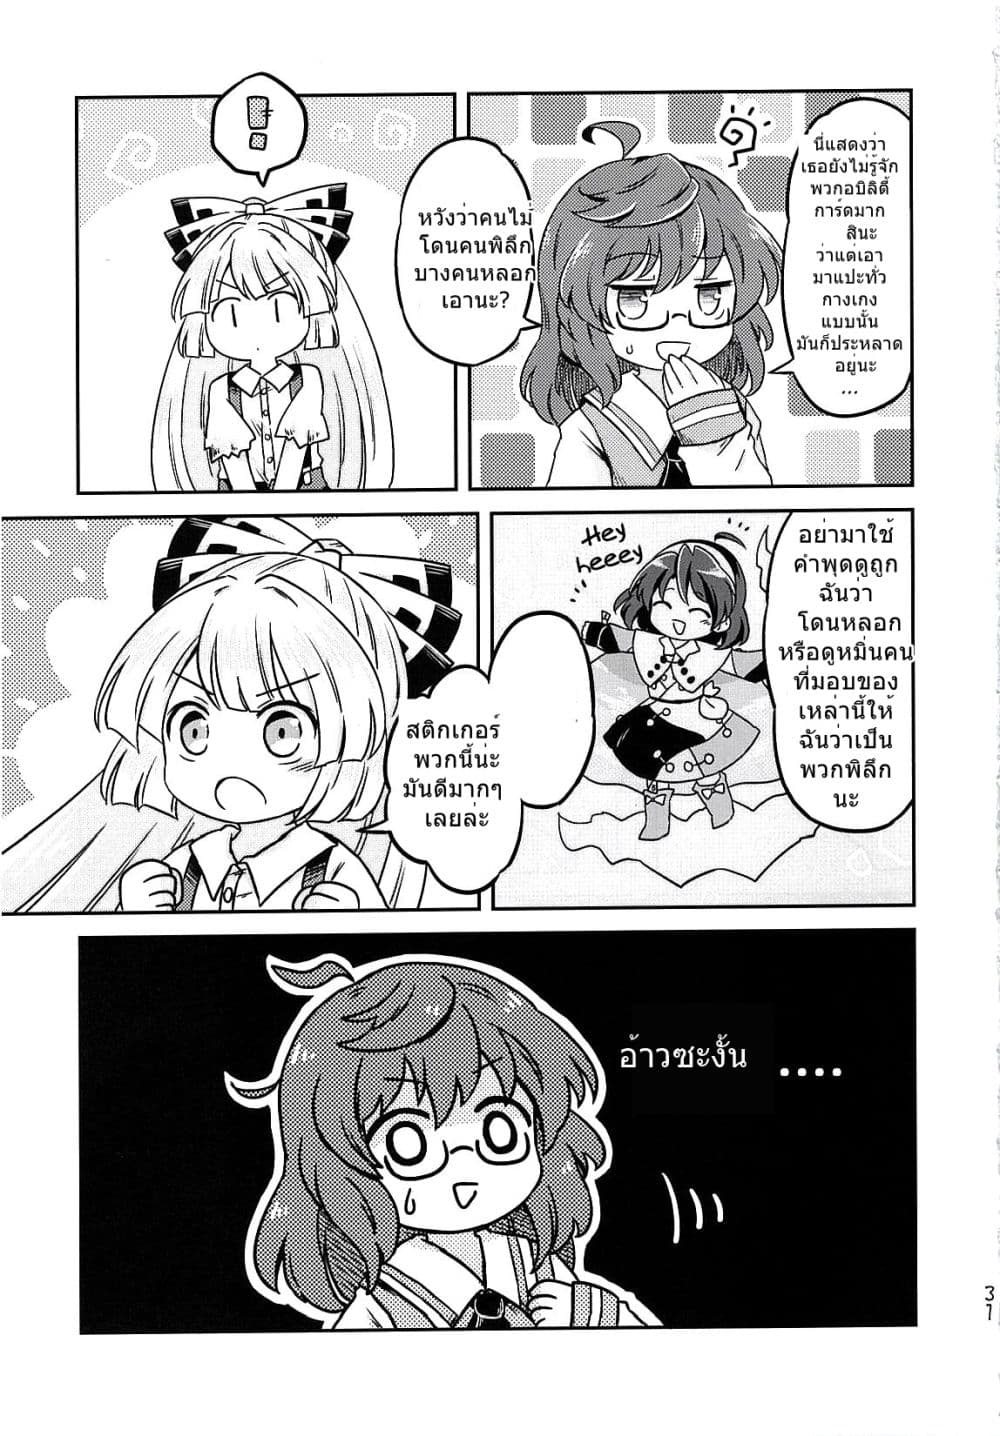 Touhou Project Chima Book By Pote ตอนที่ 2 (31)